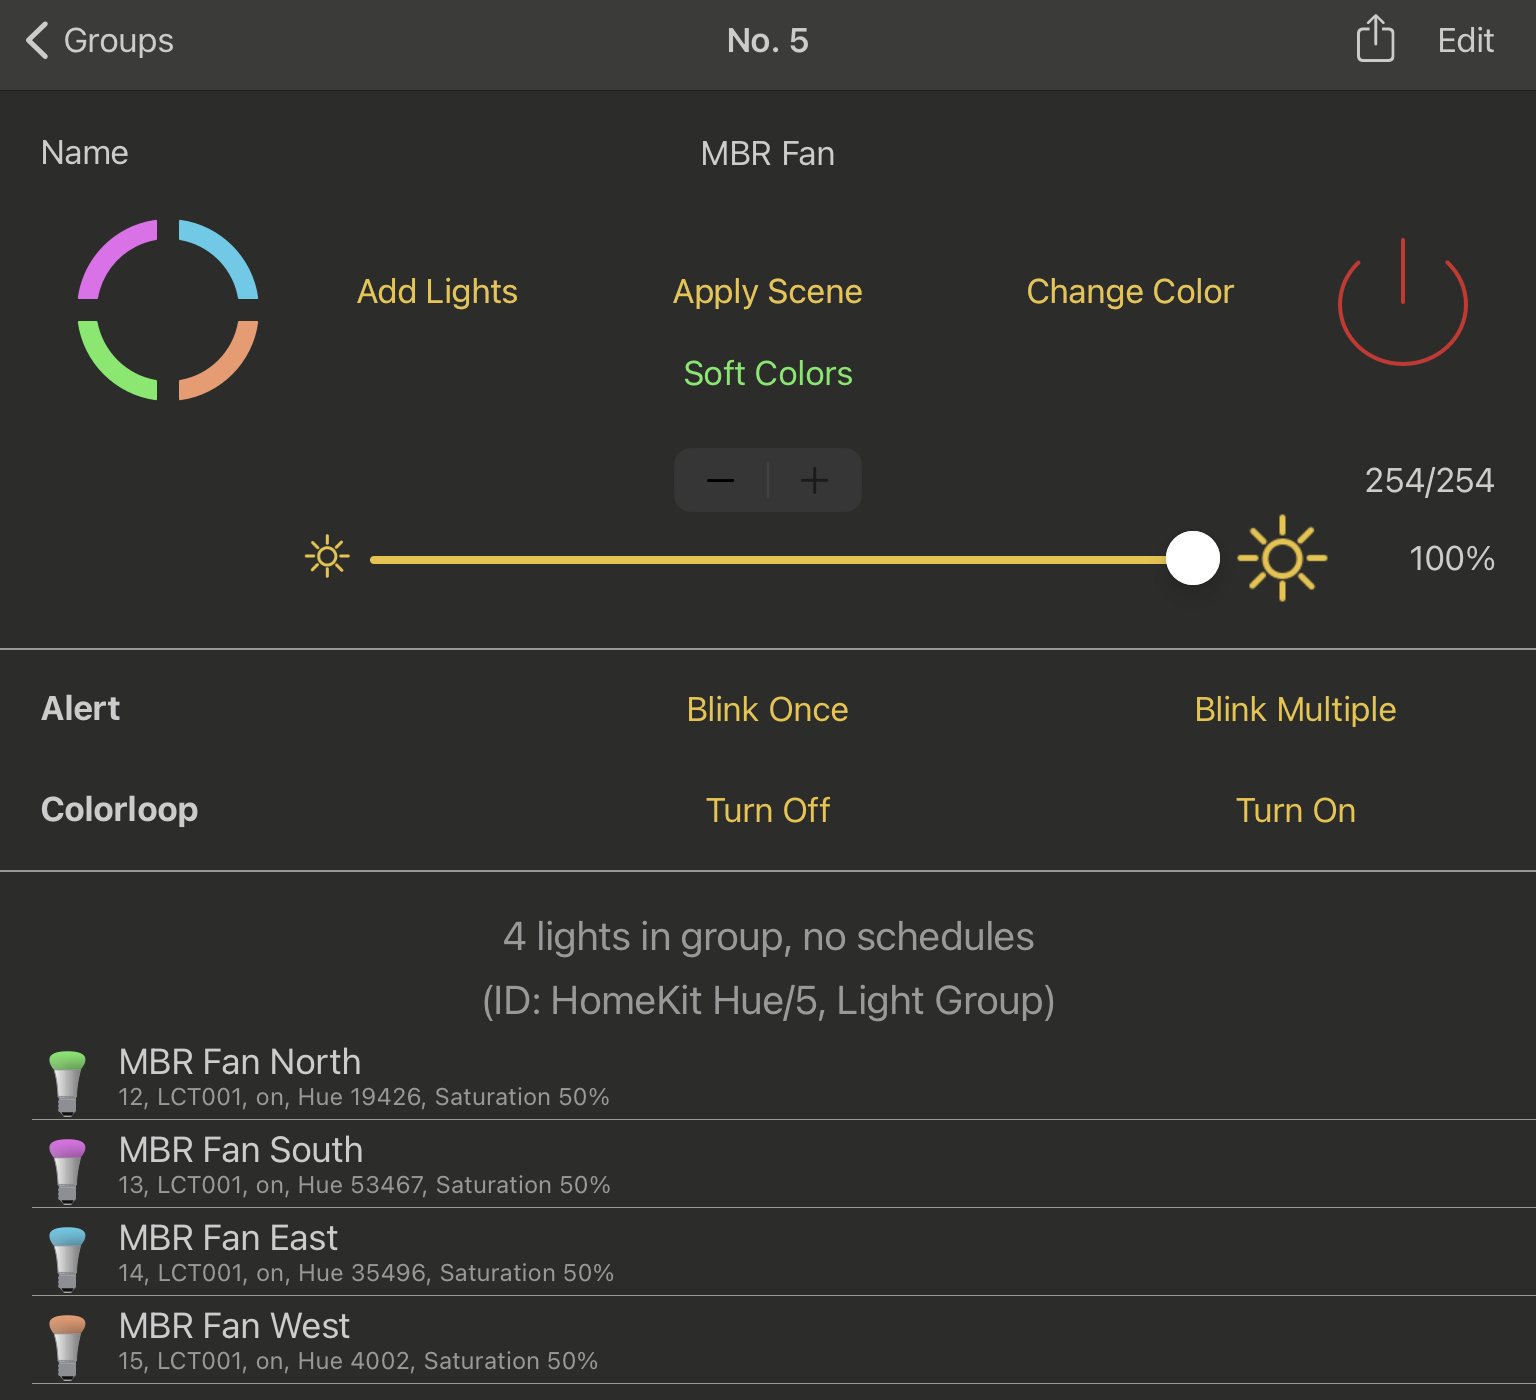 Hue Lights on Twitter: "New Group Details screen in Hue Lights v3.9 makes it easy to explore a wide range of colors, blink group, or turn Colorloop. When using Colorloop